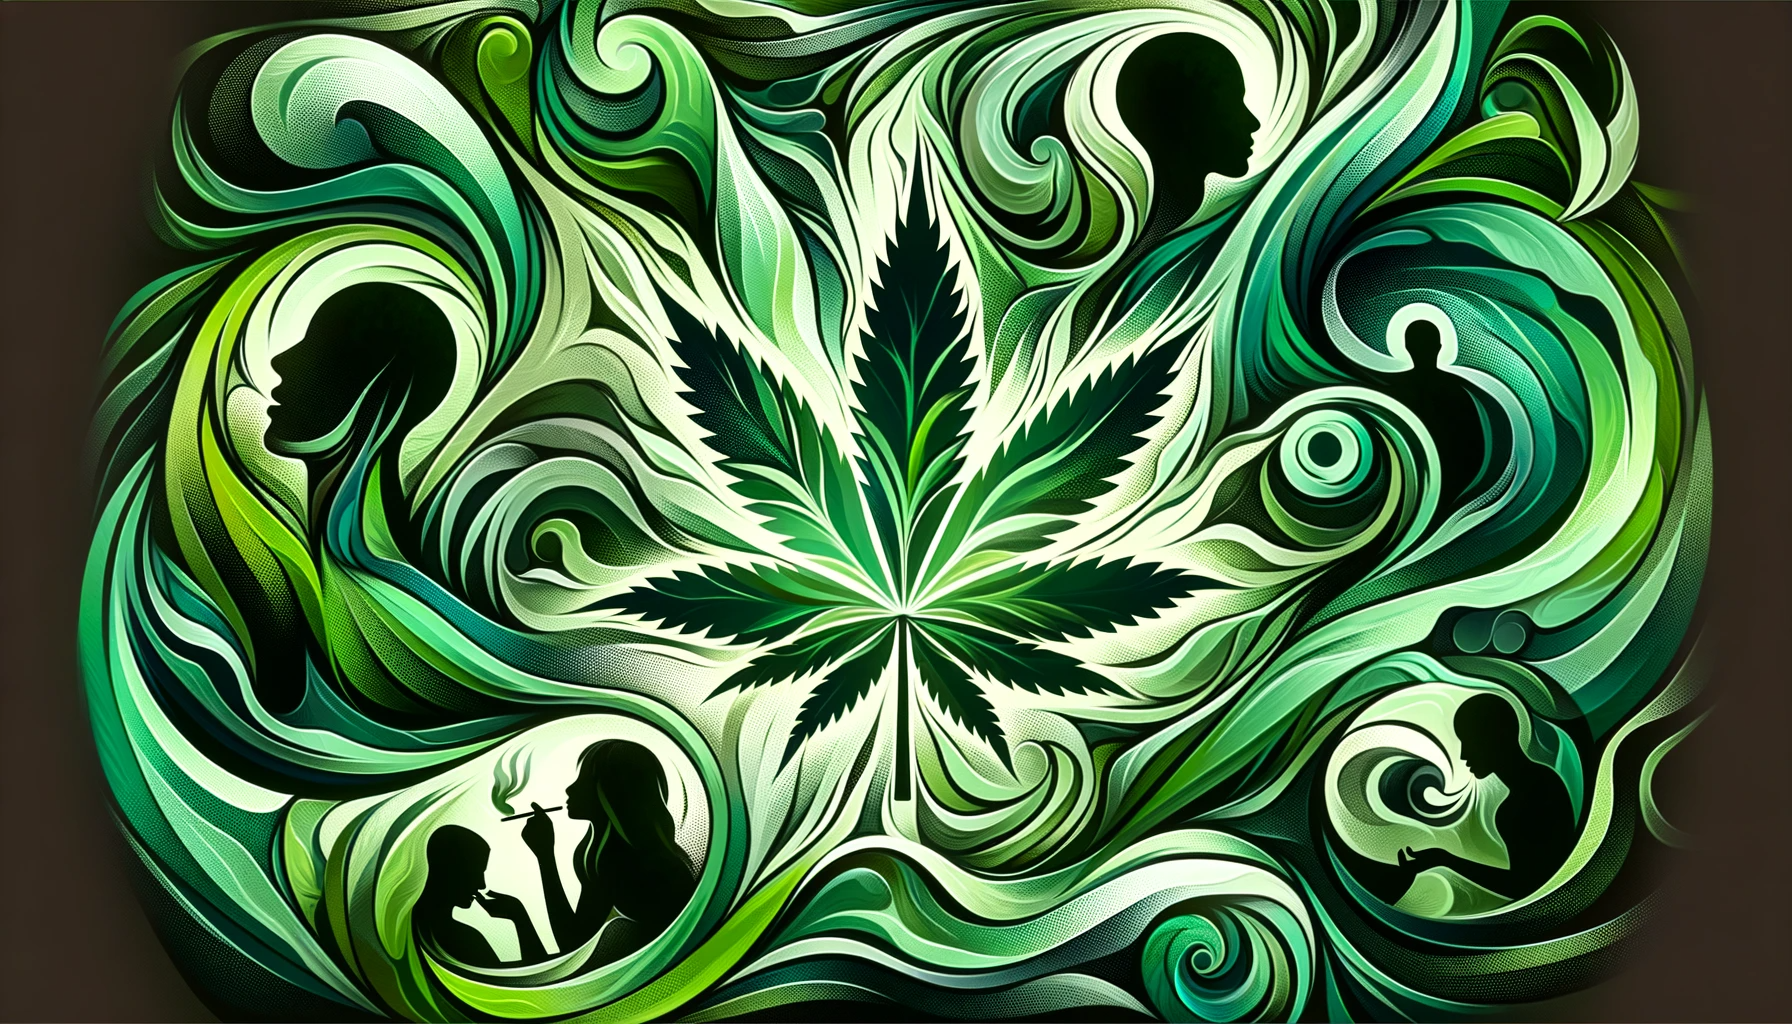 Claim: When used responsibly, marijuana has a beneficial effect on health and overall wellbeing.